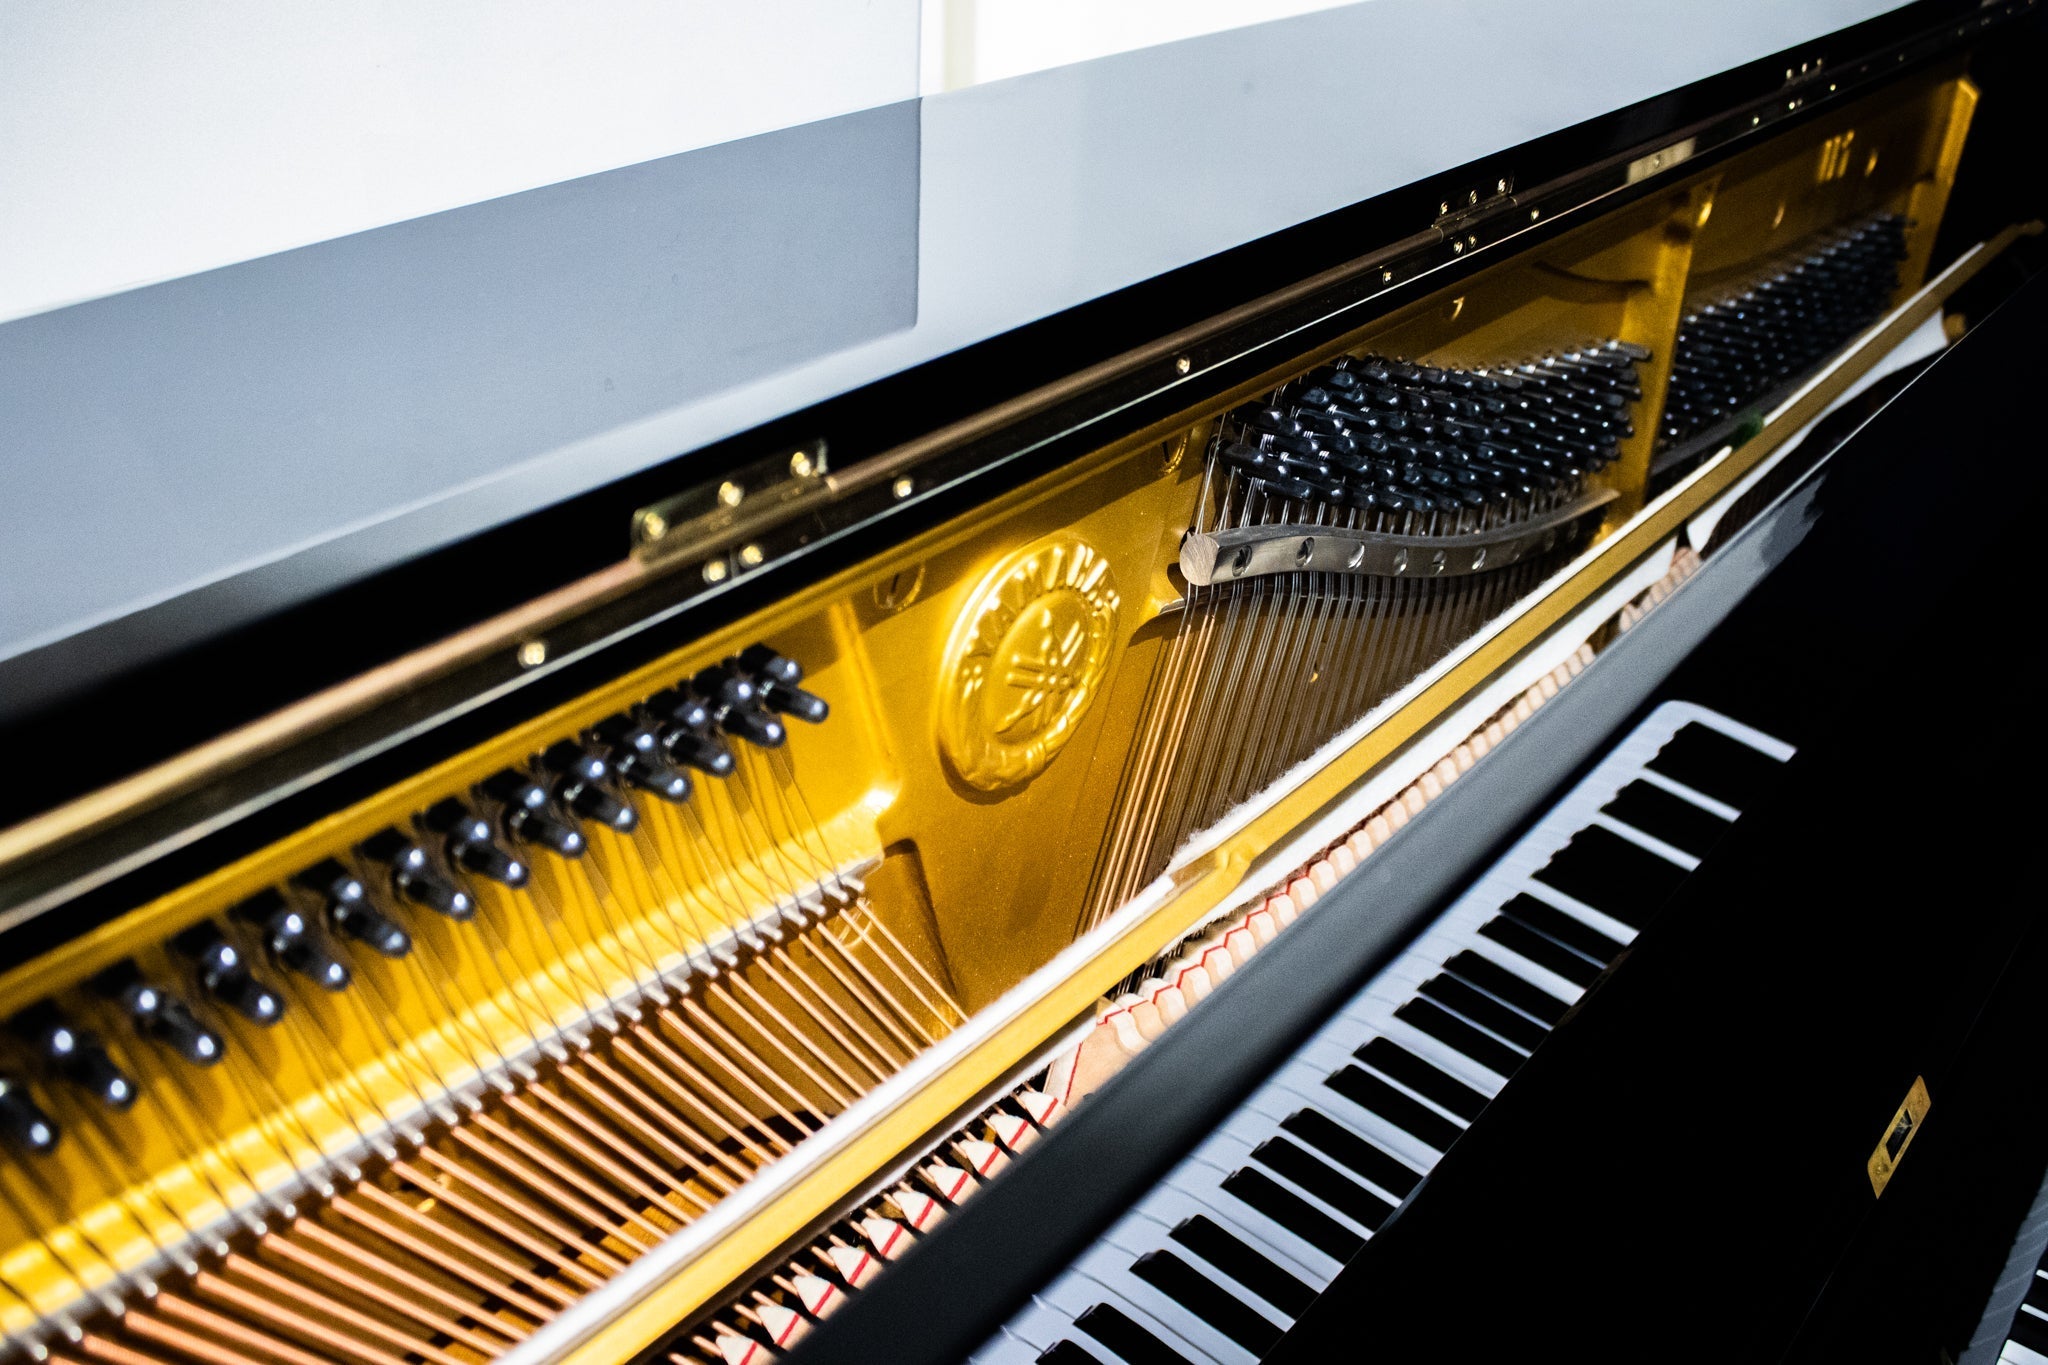 Yamaha U100 Certified Reconditioned Upright Piano (Secondhand) - Arriving Soon To Our Showroom!